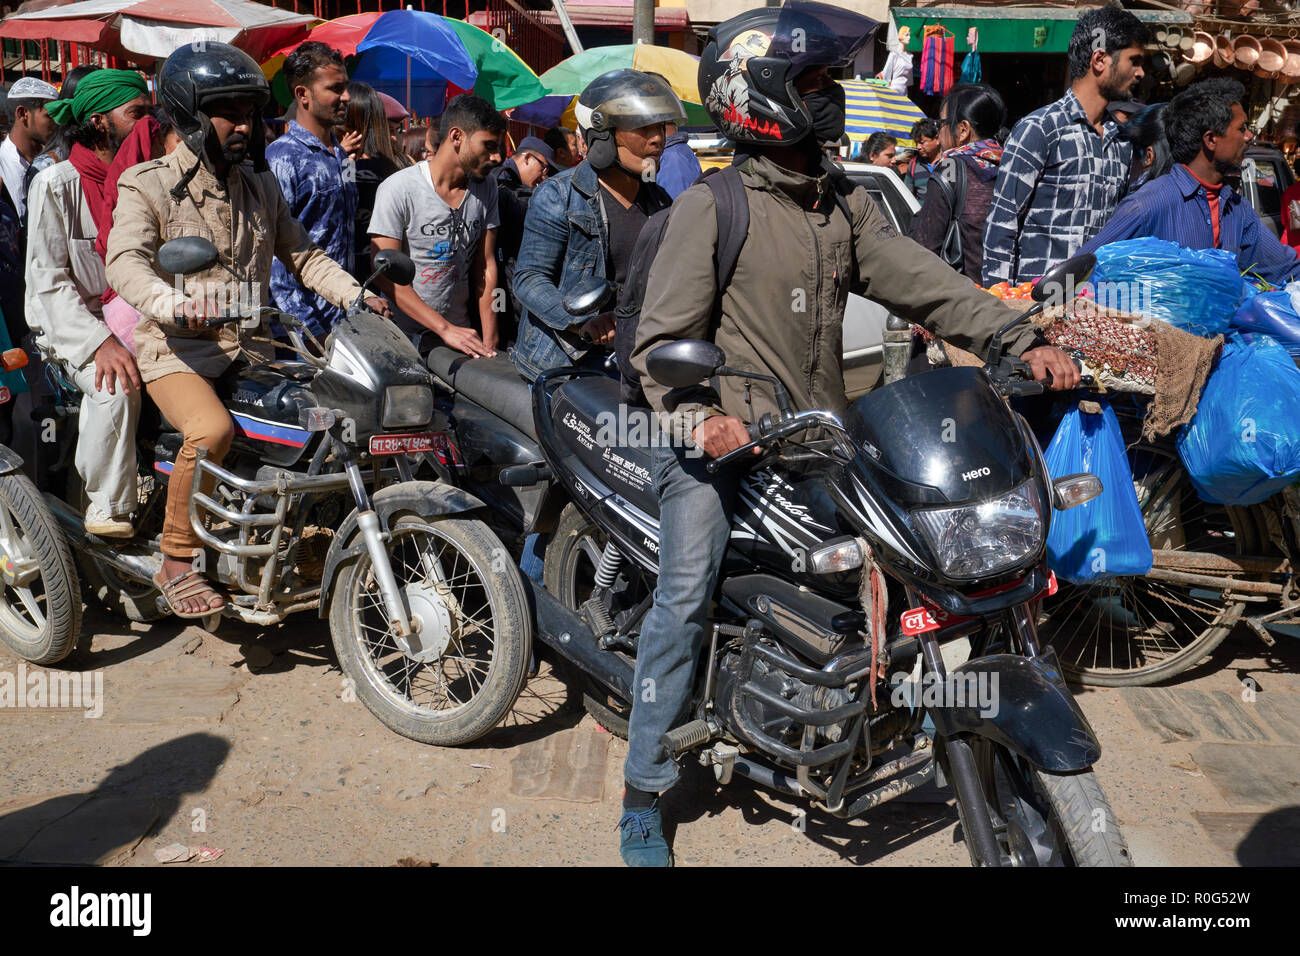 A lane in a market area in Kathmandu, Nepal, is jam-packed with motorcycles and pedestrians, a typical traffic situation for the Nepalese capital Stock Photo